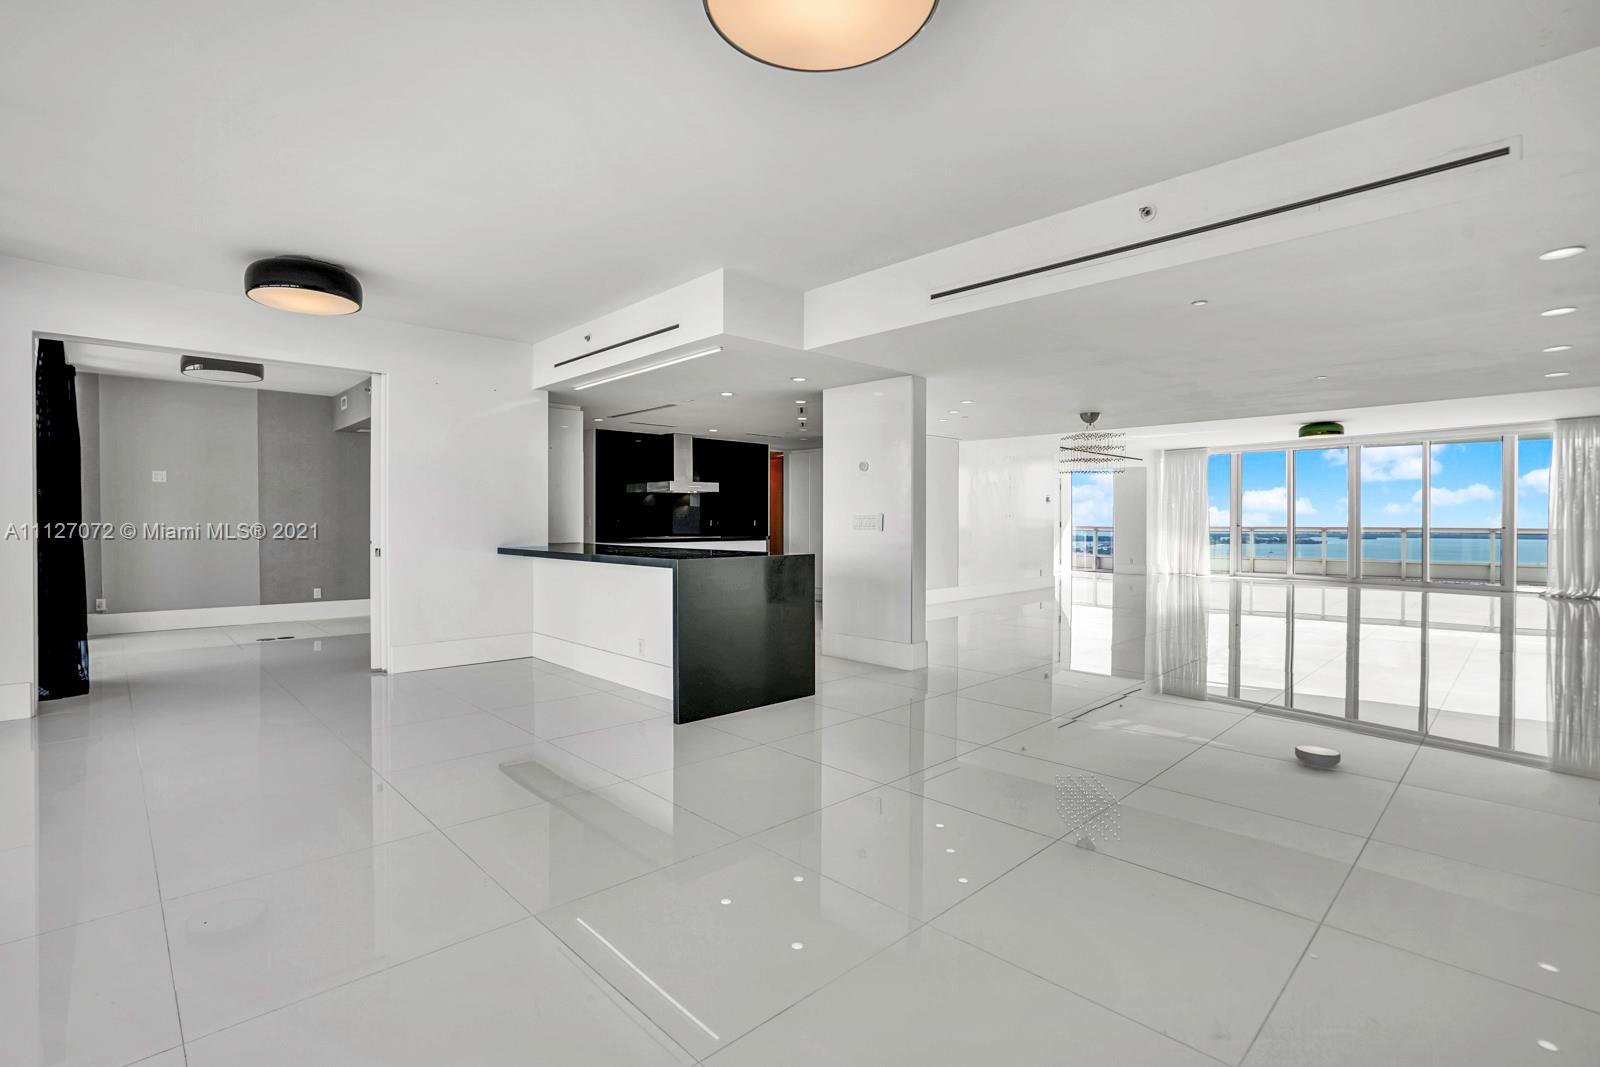 This Majestic 4,030 sqft unit at Santa Maria features floor to ceiling windows with spectacular PANORAMIC VIEWS from Downtown Skyline, Key Biscayne and the Atlantic Ocean. This unit was designed by the renowned interior dedigners Angel Sanchez & Chris Coleman and modern style 4 Bedrooms, 4.1 Bathrooms plus office space designed for family enjoyment. This unit features large master suite with sitting area and balcony, private foyer, spacious living and dining area. Enjoy luxury amenities as part of living in Santa Maria such as waterfront pool, marina, business center, tennis courts, club house, private gym in the 51th floor, and café restaurant in lobby.